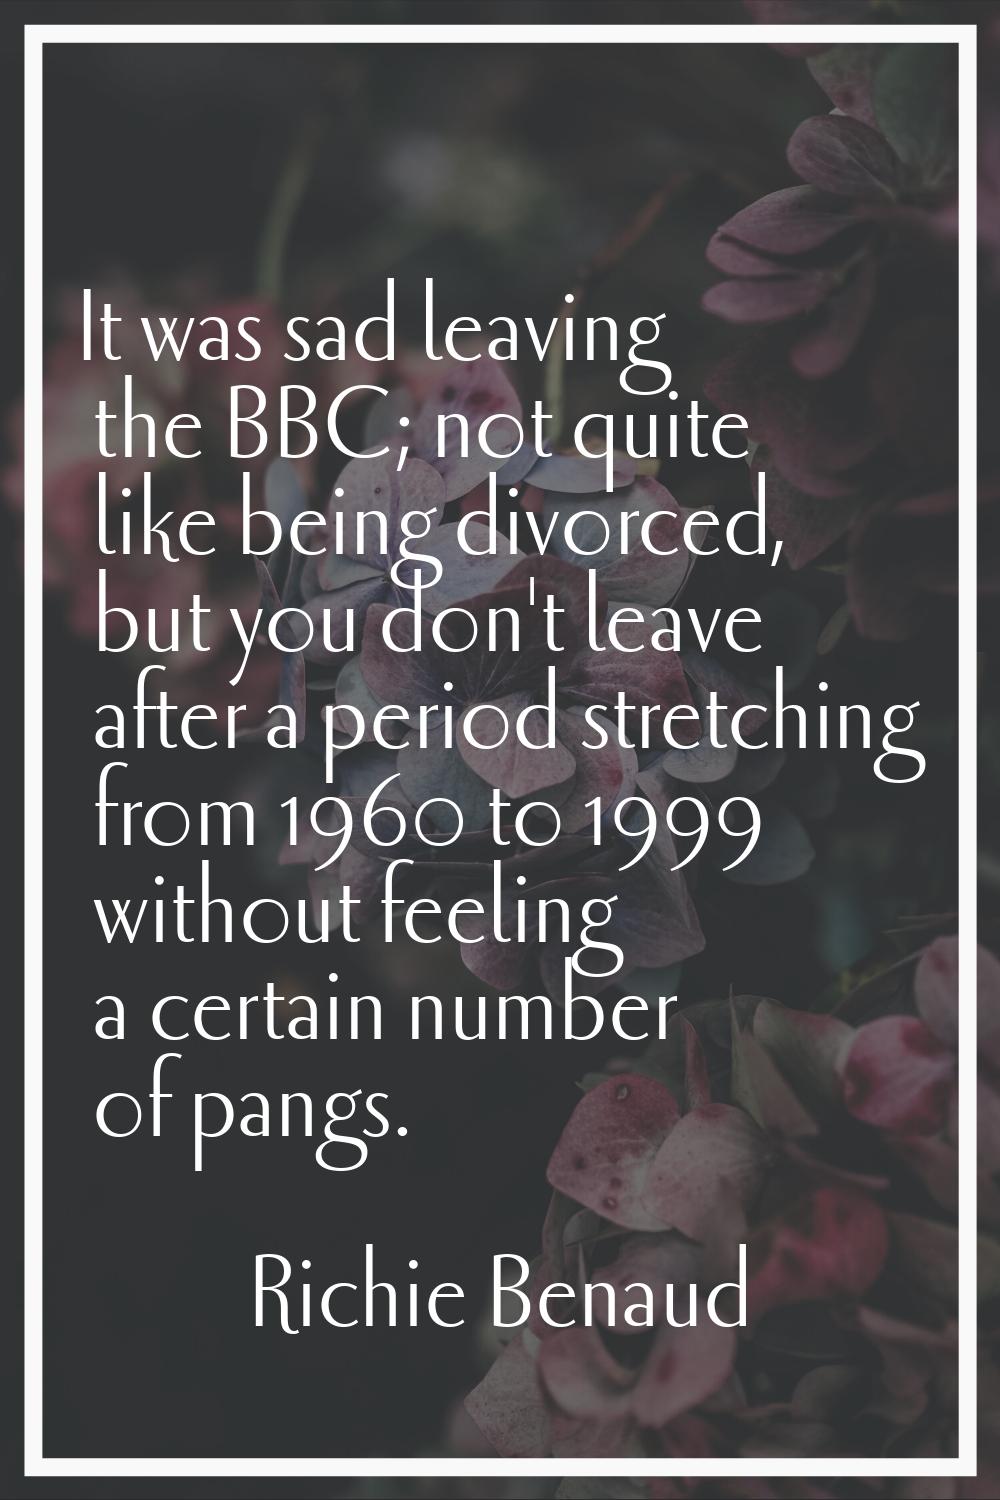 It was sad leaving the BBC; not quite like being divorced, but you don't leave after a period stret